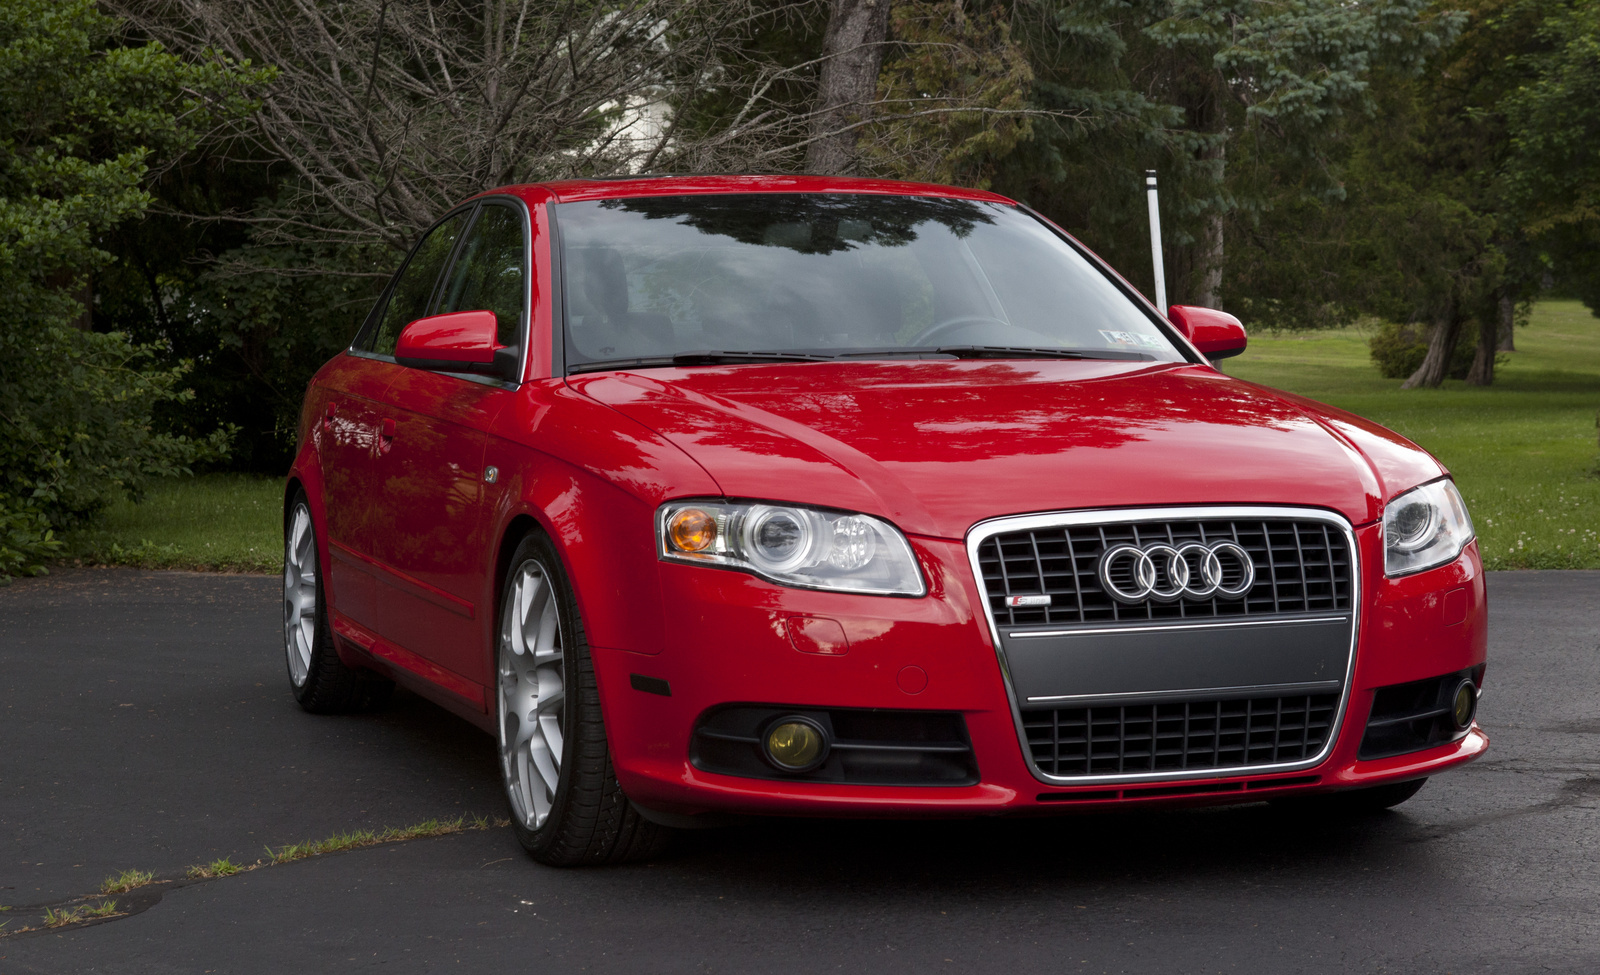 Audi A4 2.0 TDI review, test drive - Introduction